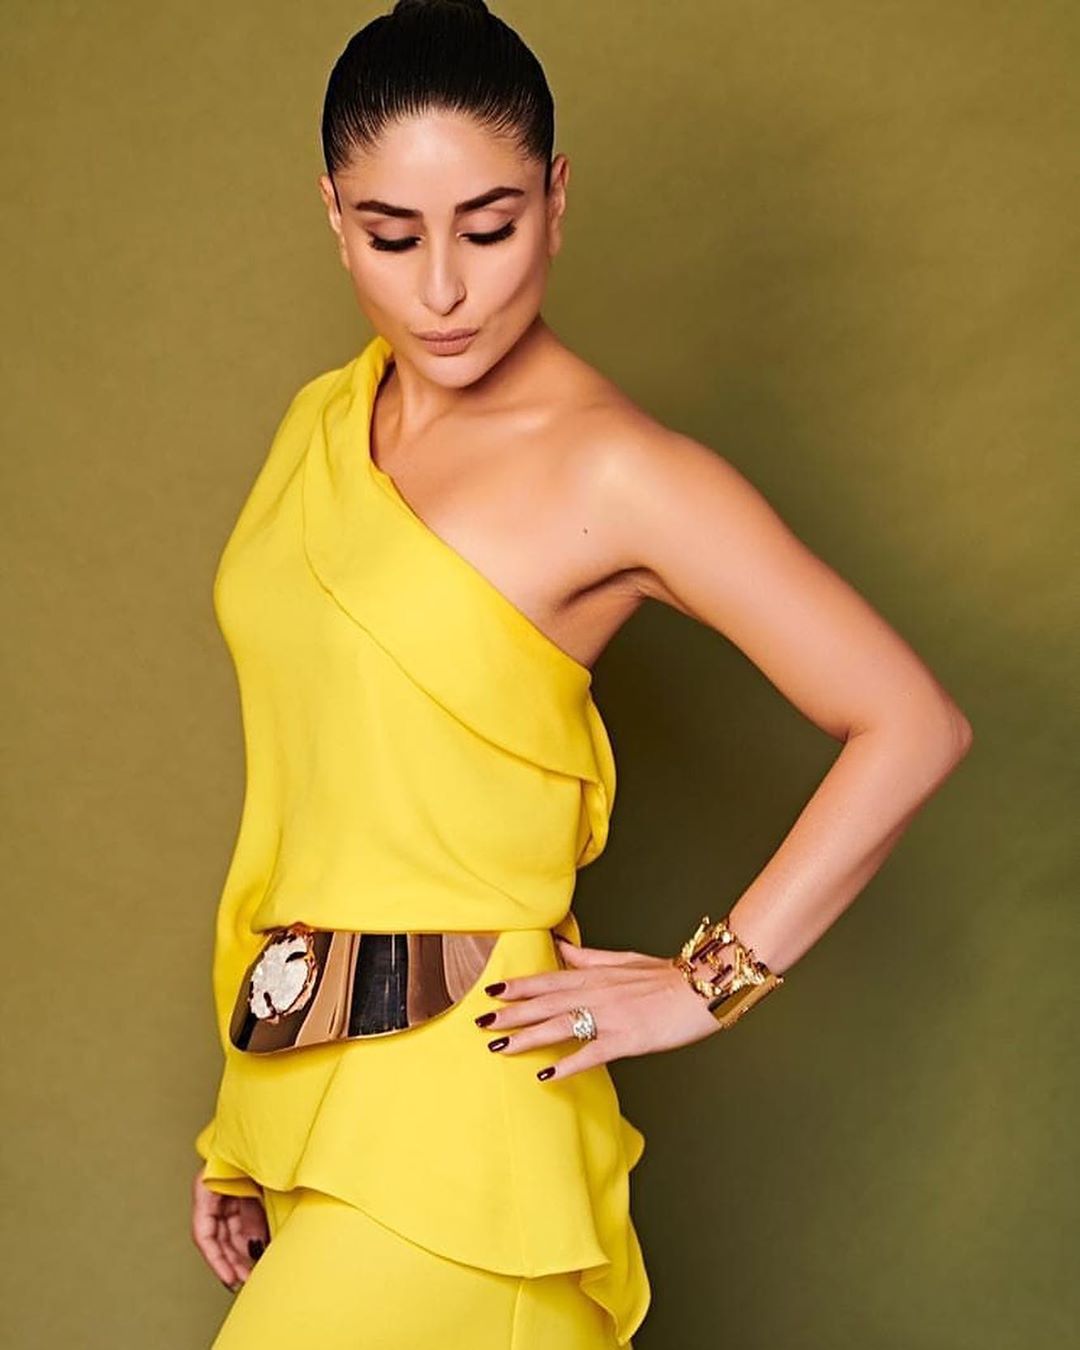 Kareena Kapoor Khan make a fashion blunder with this thigh-high slit gown